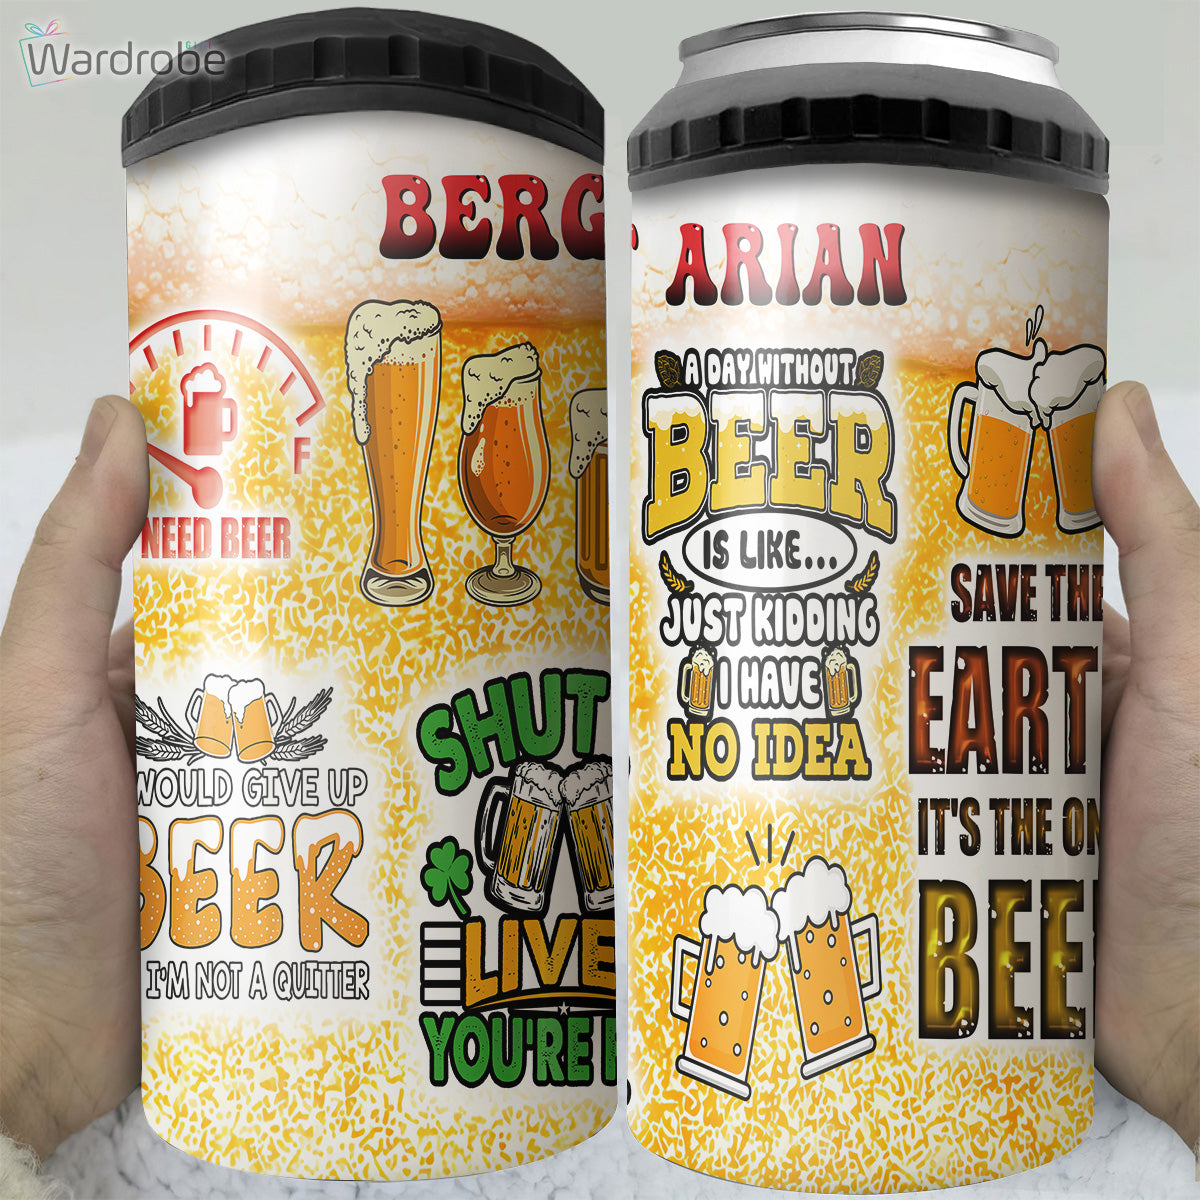 Berget Arian A Day Without Beer Funny Beer Tumbler 4 in 1 Can Cooler 16Oz Tumbler Cup Bottle Cooler